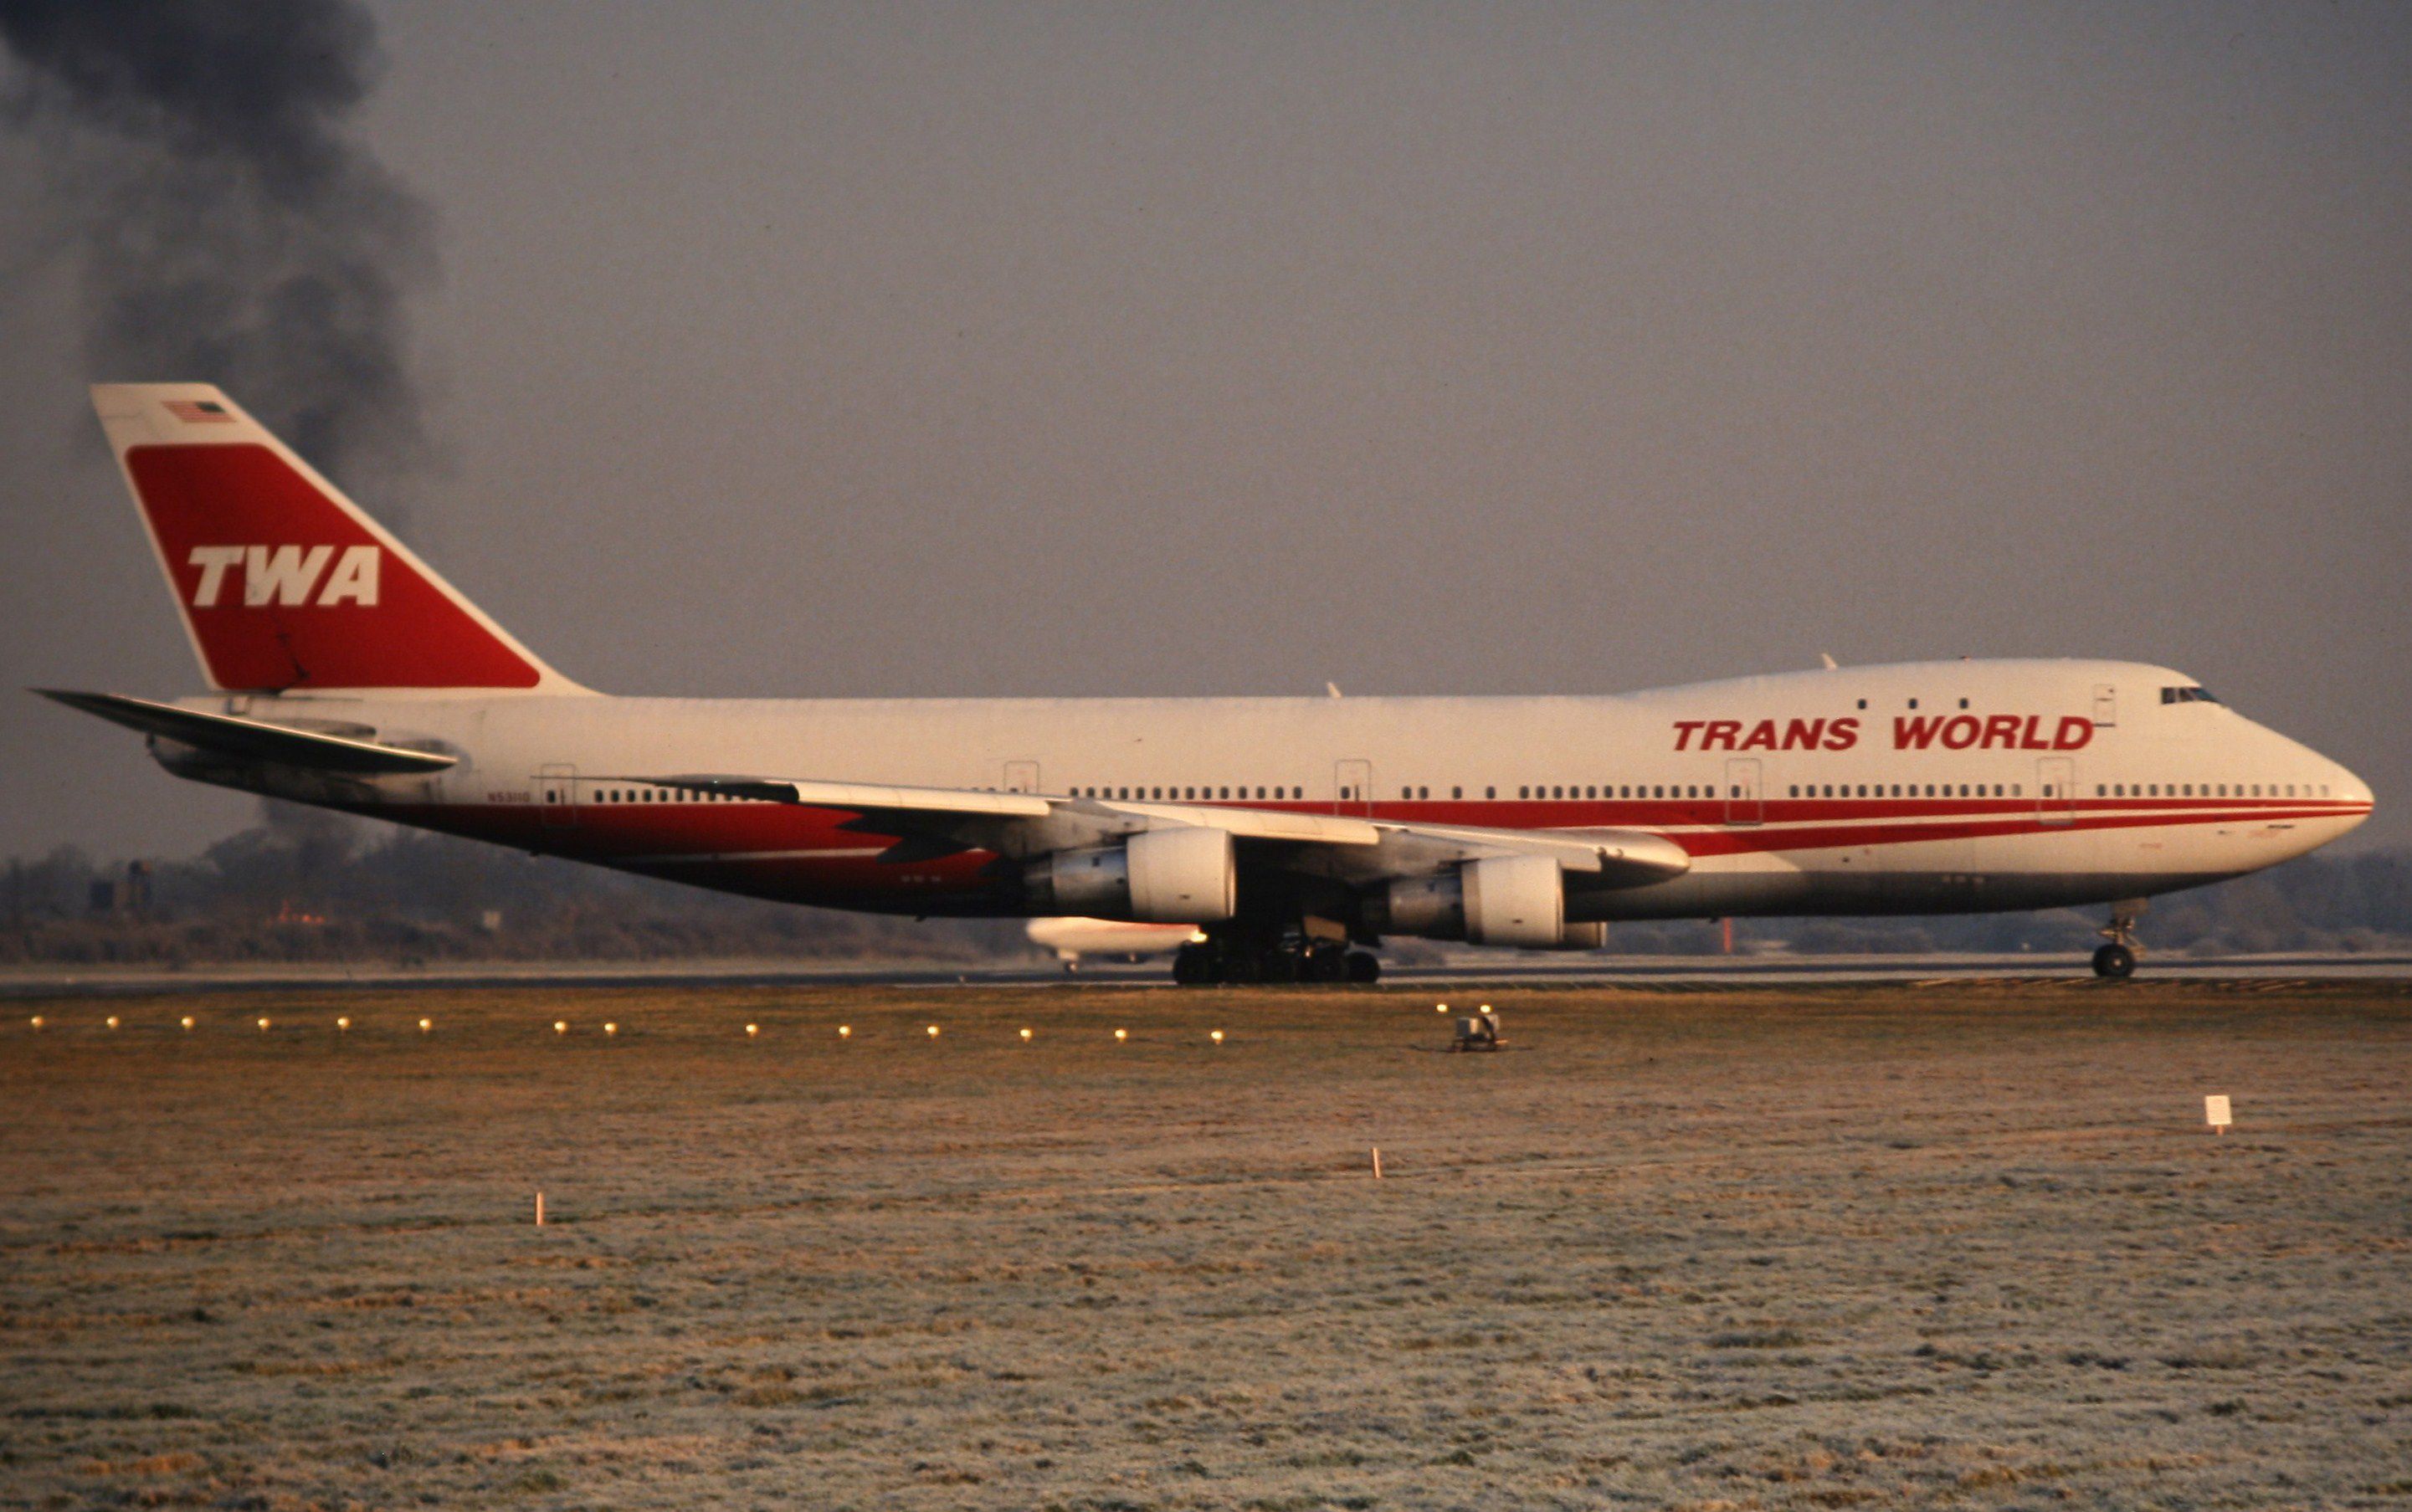 TWA Flight 800, July 17, 1996, a Boeing 747-131 breaks up mid-air due to  fuel tank explosion after caused by a short circuit. All 230 people on  board (212 passengers, 18 crew) are killed. : r/CatastrophicFailure